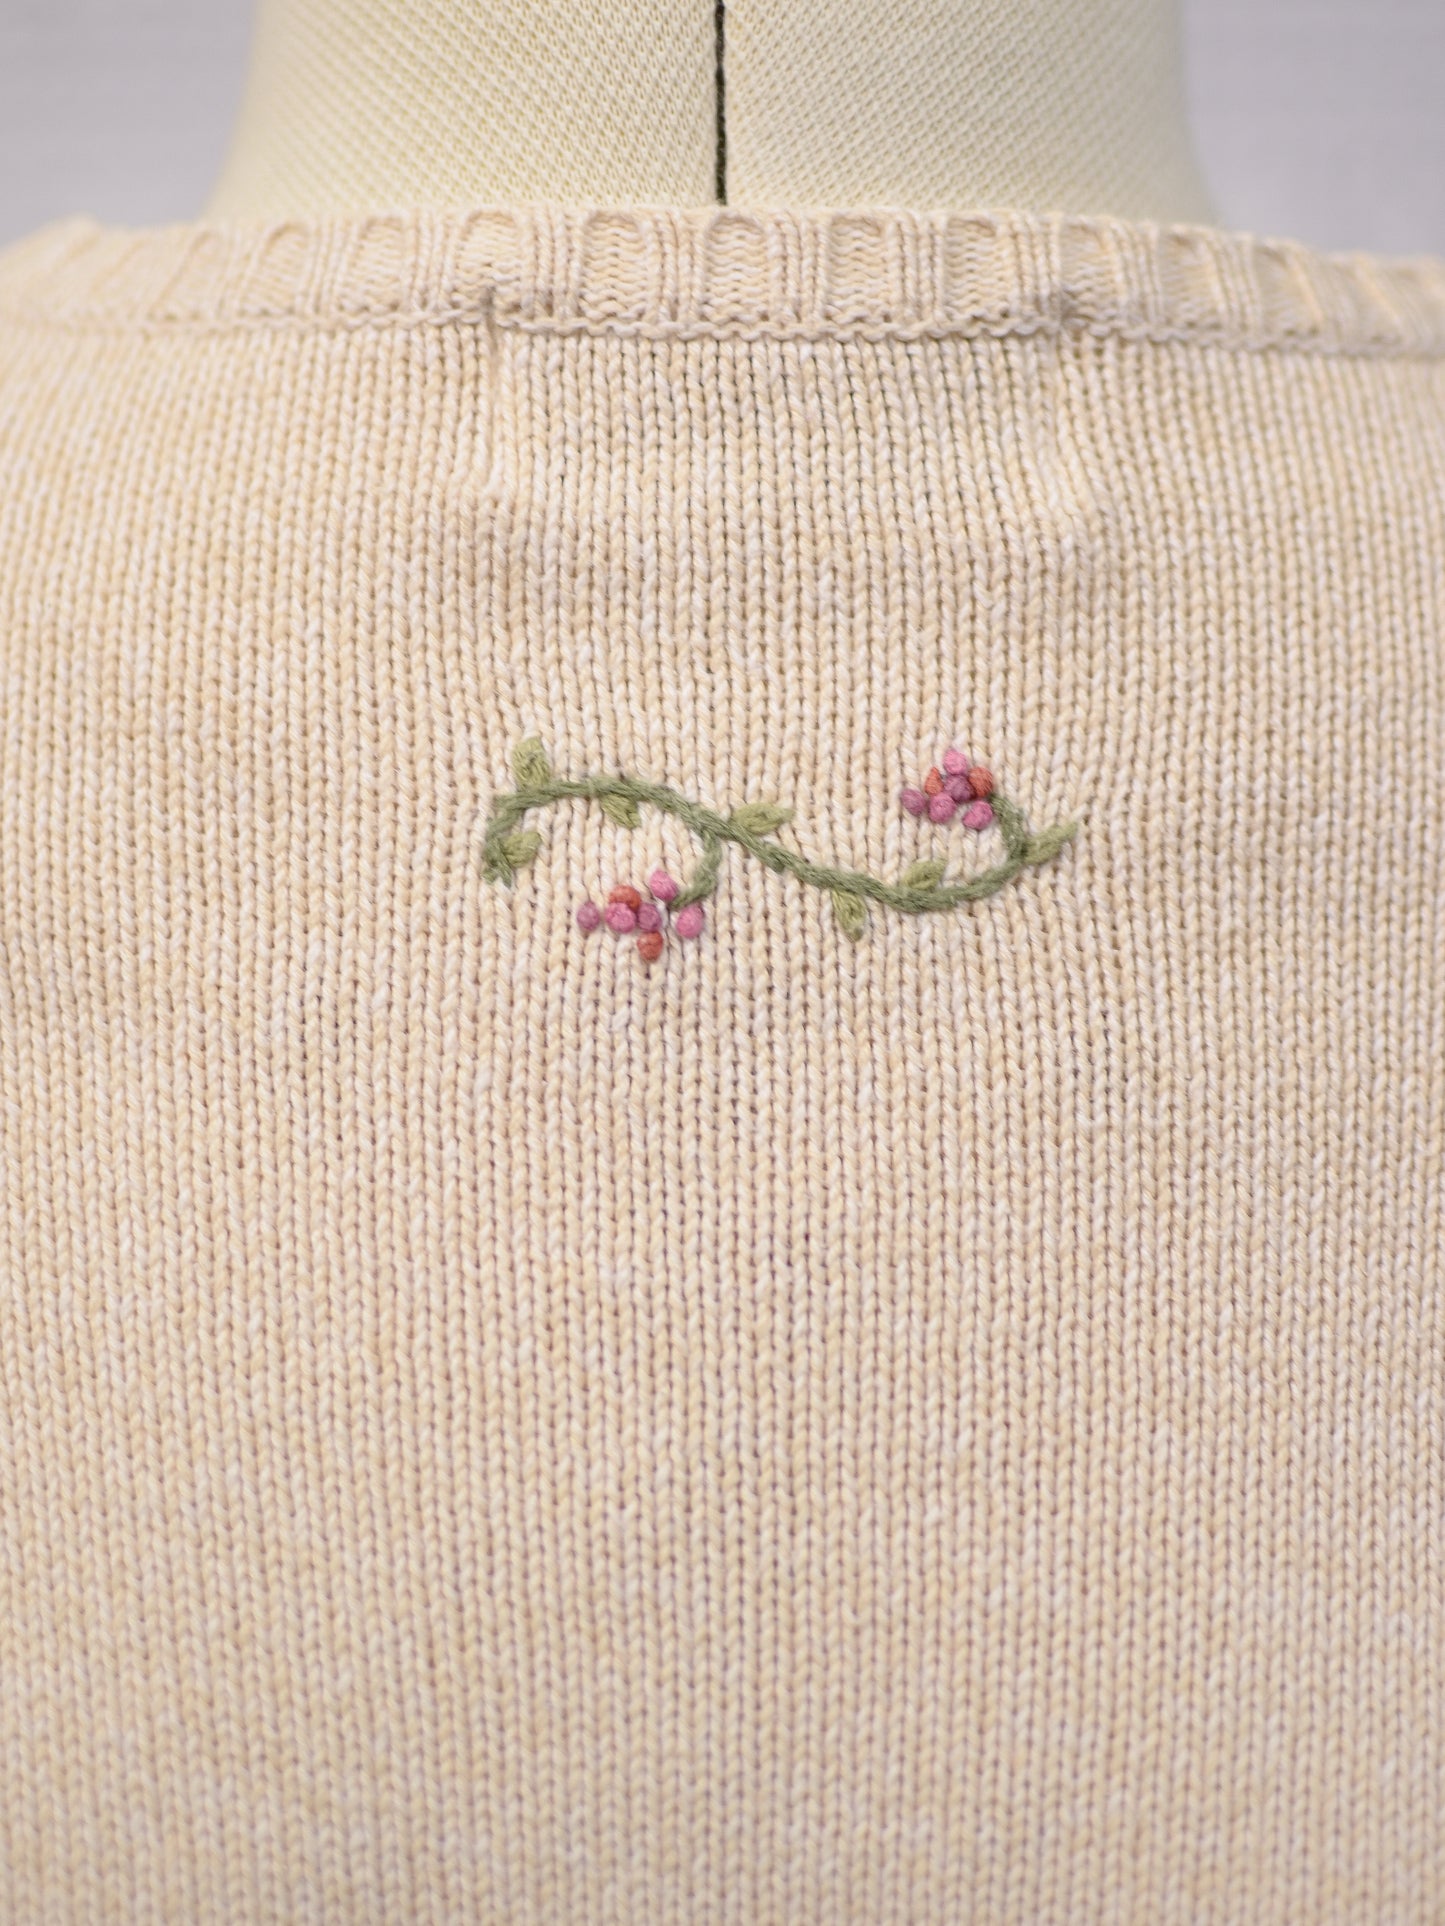 1990s Tulchan cream and pink embroidered rose jumper